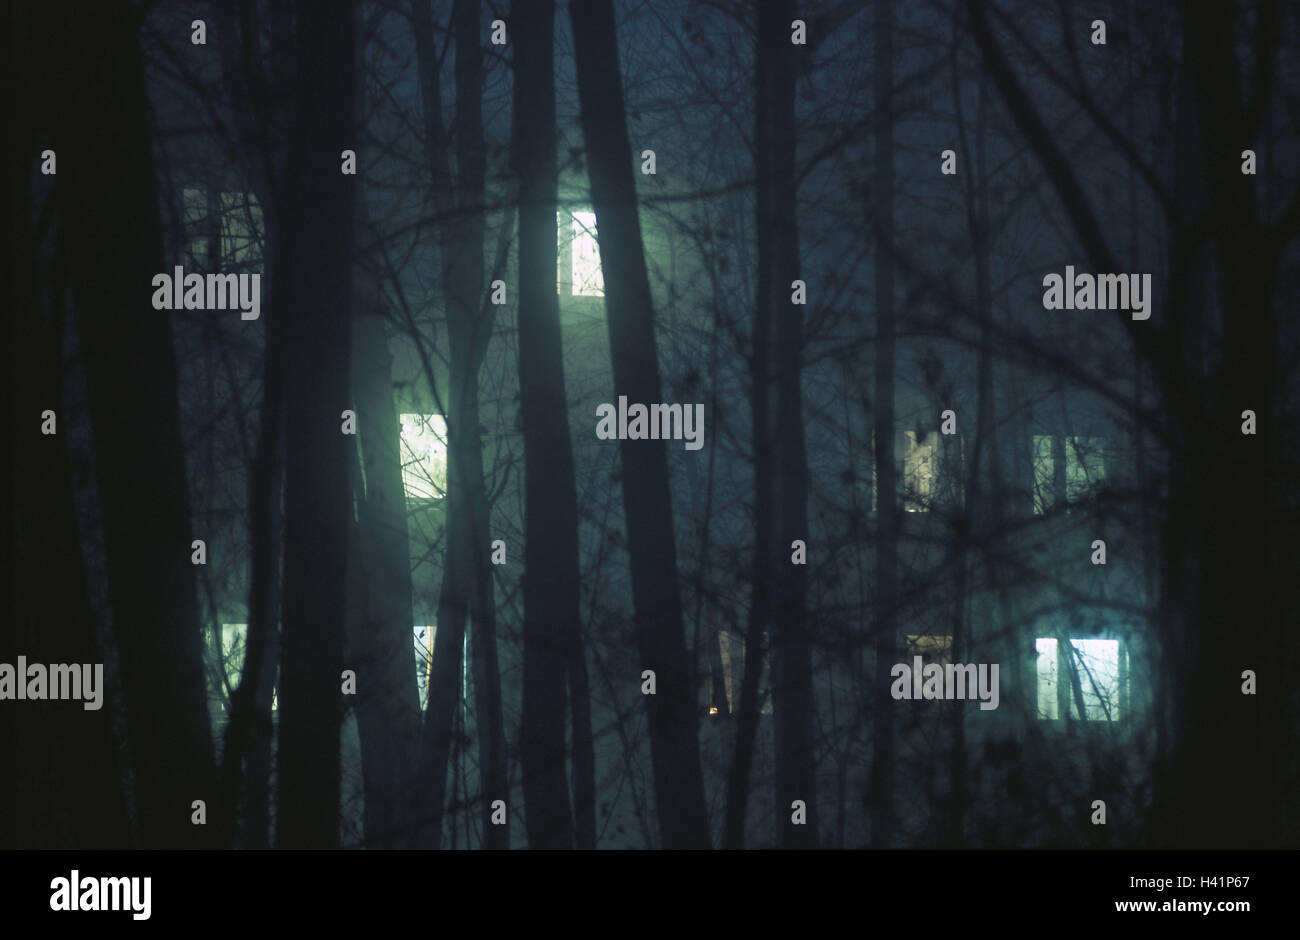 Edge the forest, bushes, branches, view, residential house, window, illuminateds, night wood, house, buildings, apartment block, light, burn, in, lights, darkness, icon, conception, mysteriously, mystically, awfully, gespenstig, grimly, shadowy, darkly, fear, mood Stock Photo